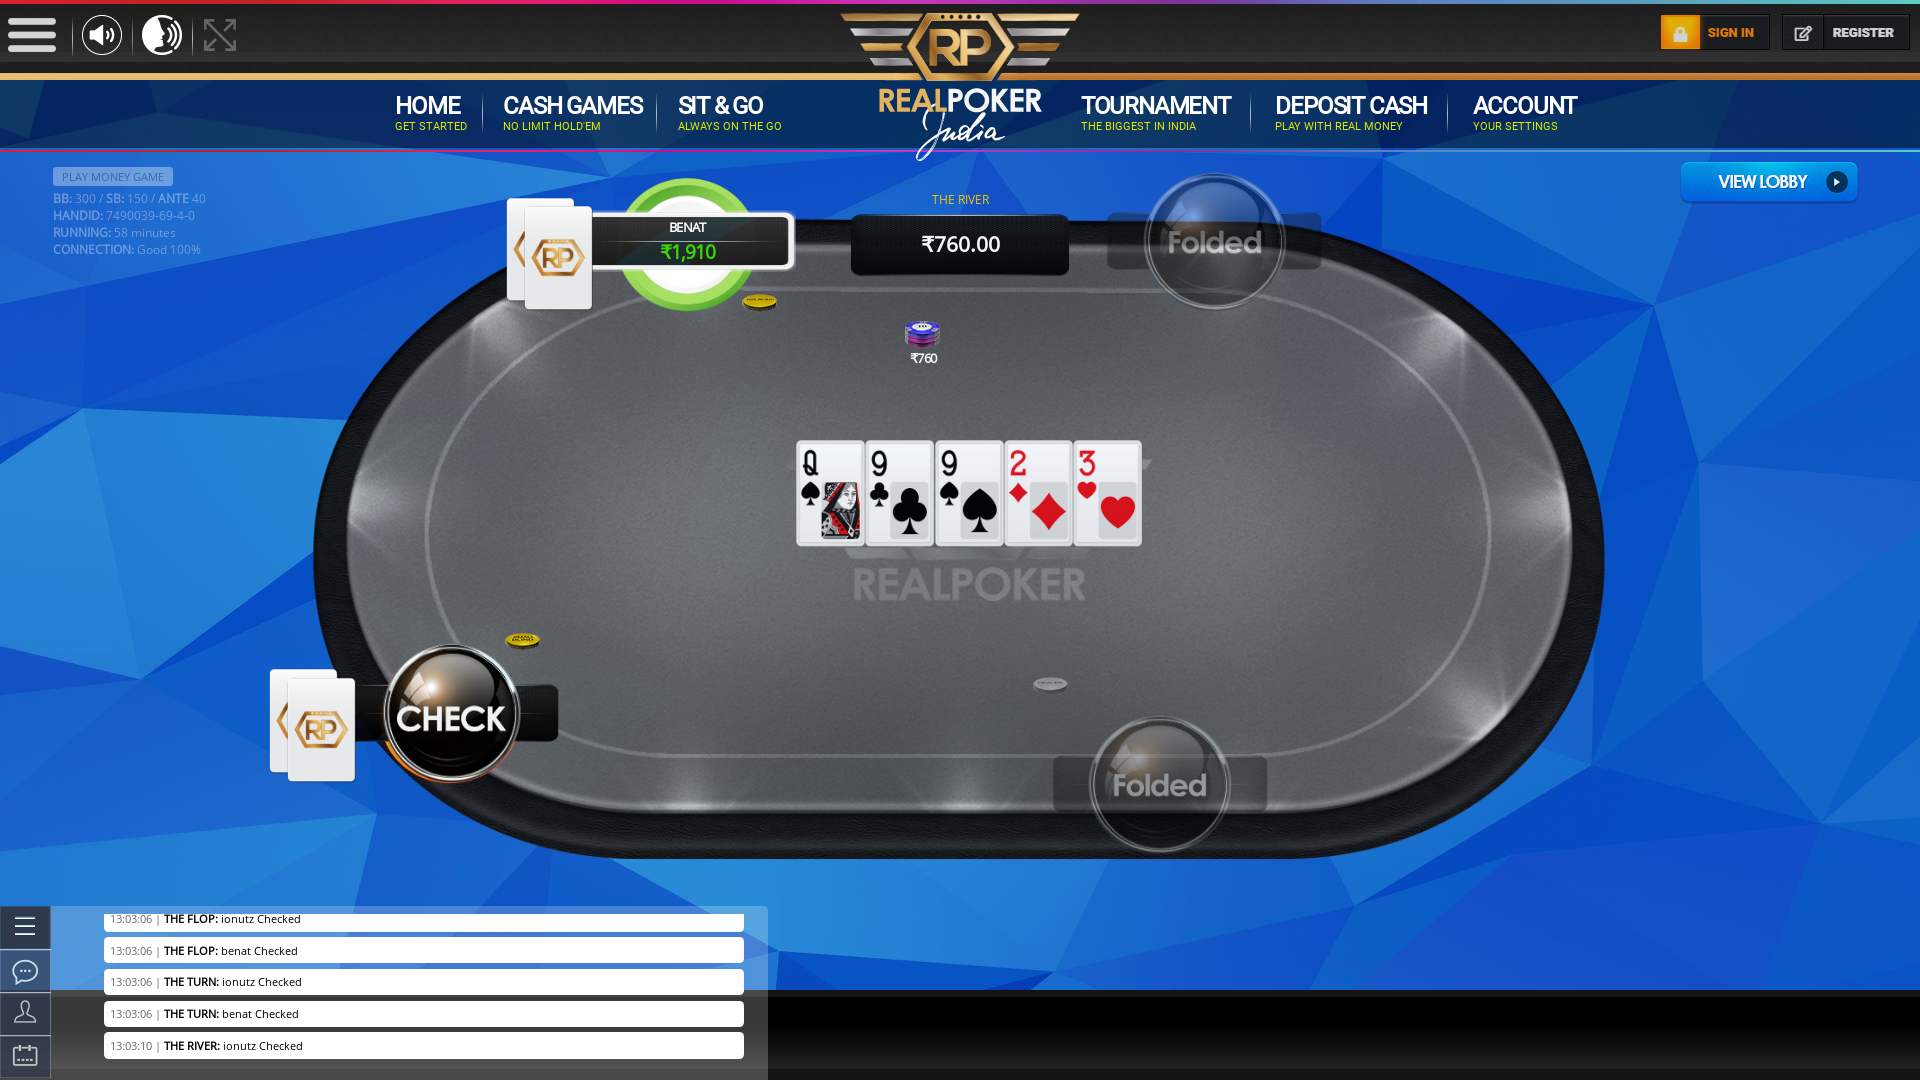 Nandi Hills, Bangalore online poker game on a 10 player table in the 58th minute of the meeting